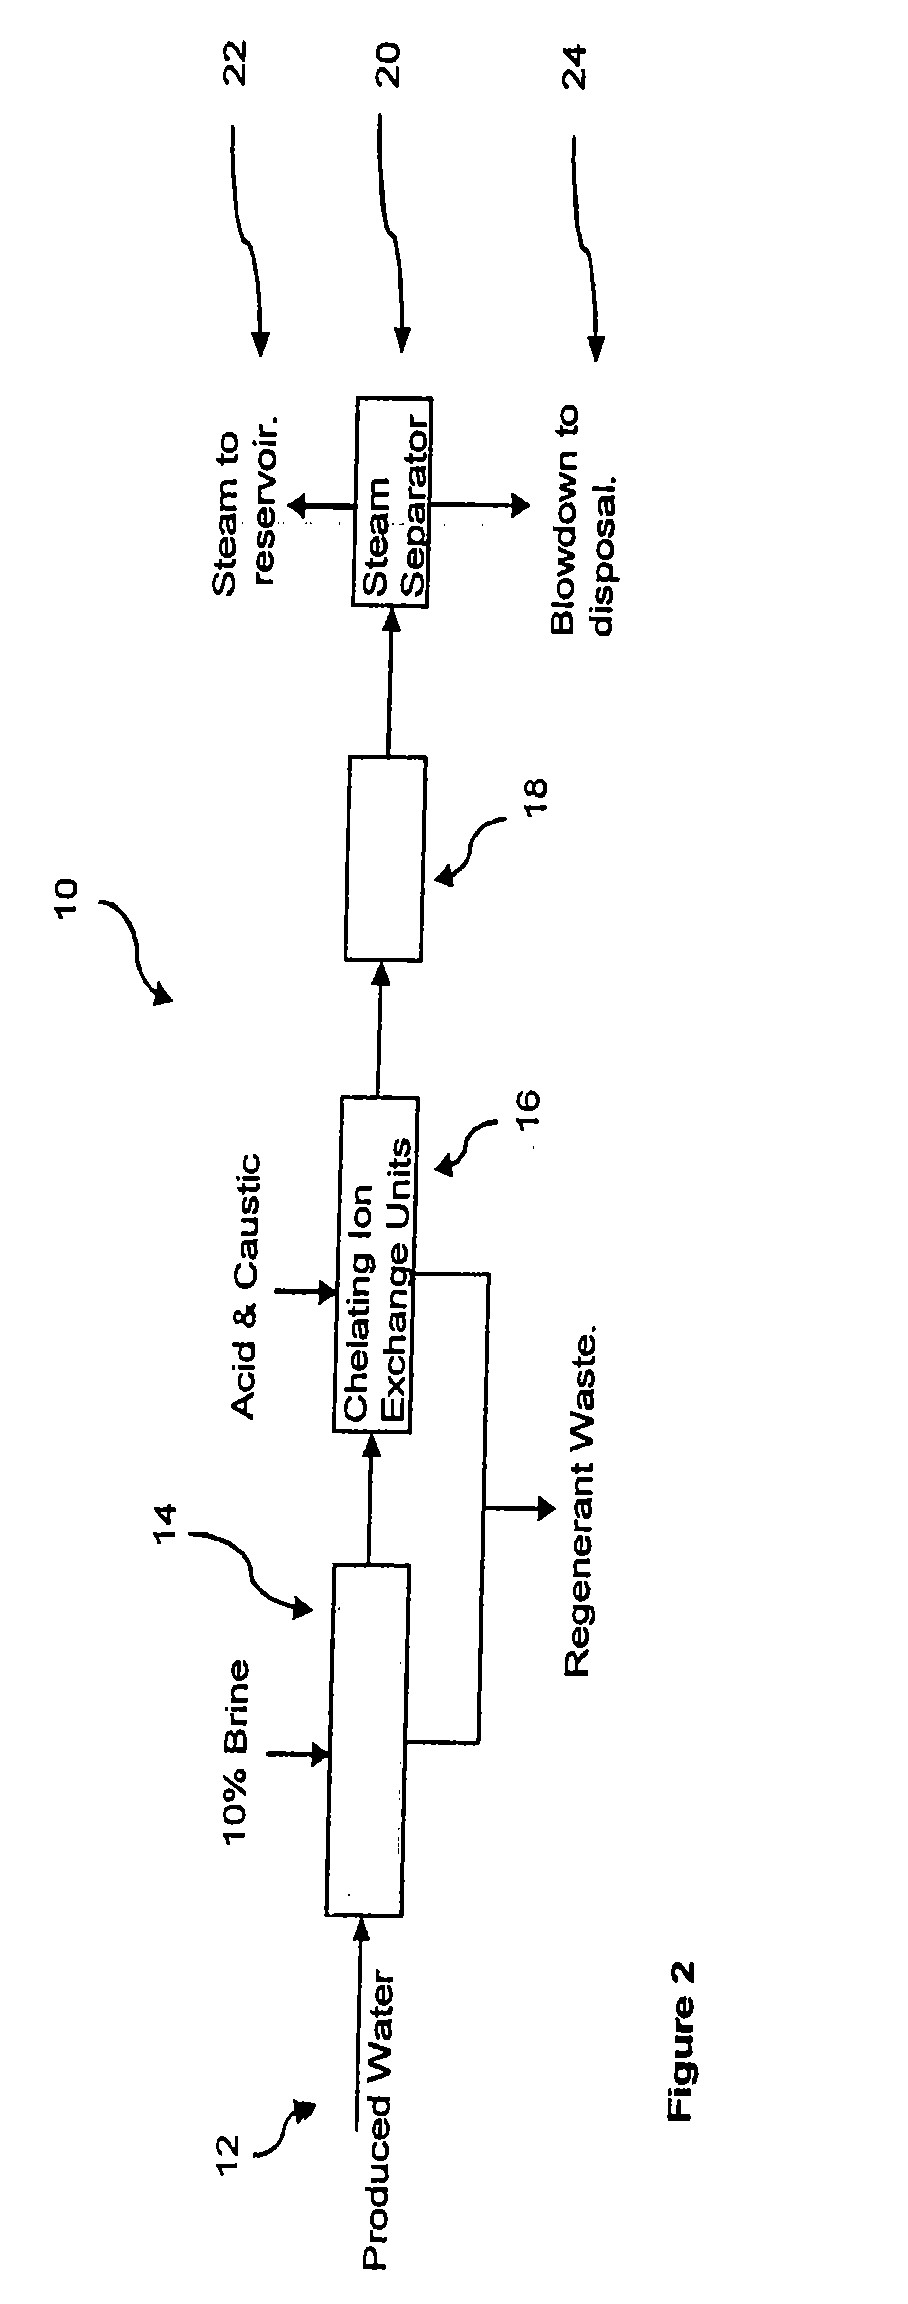 Method and apparatus for treating water to reduce boiler scale formation